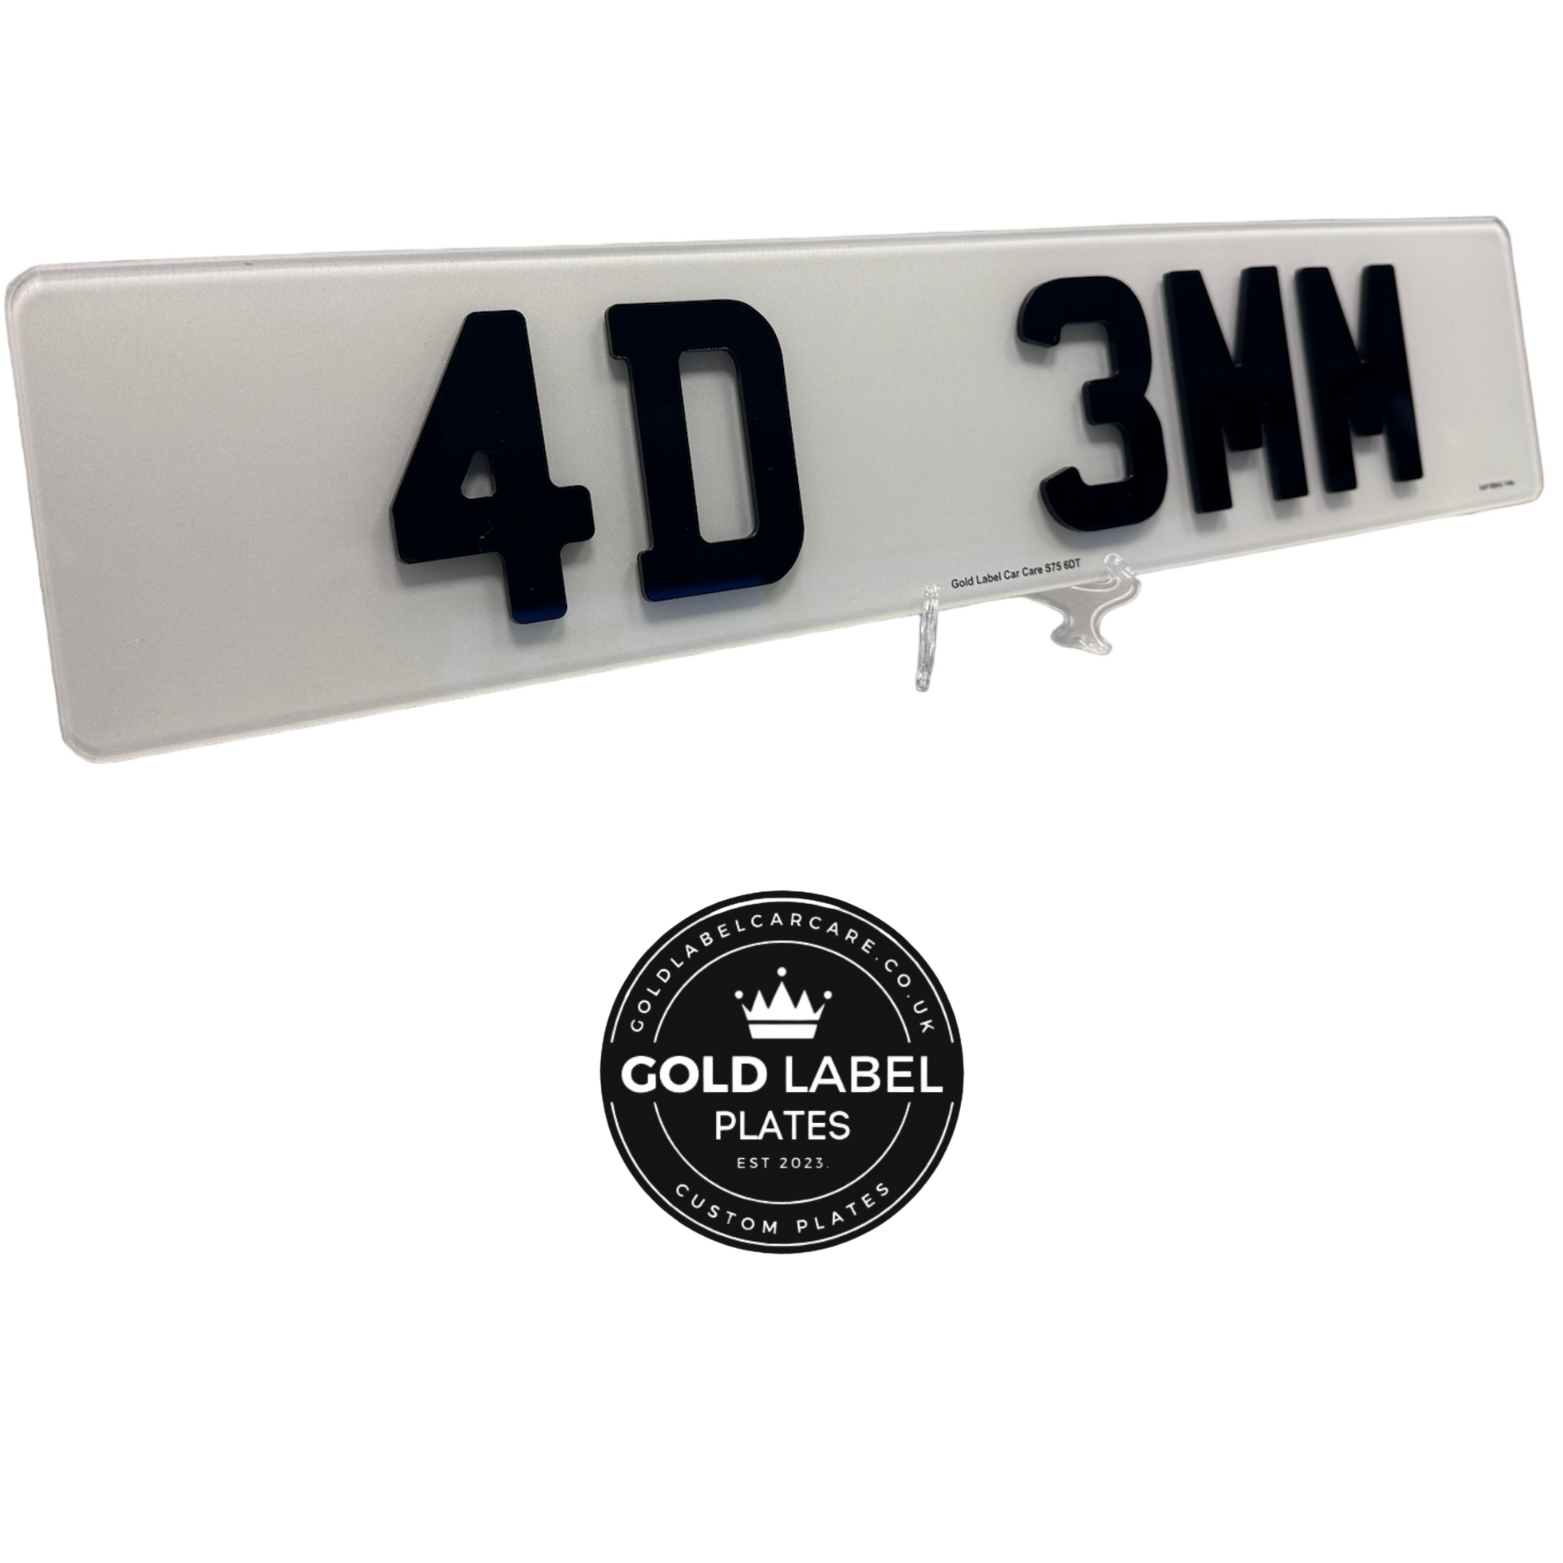 4D 3MM Number Plates, Barnsley South Yorkshire